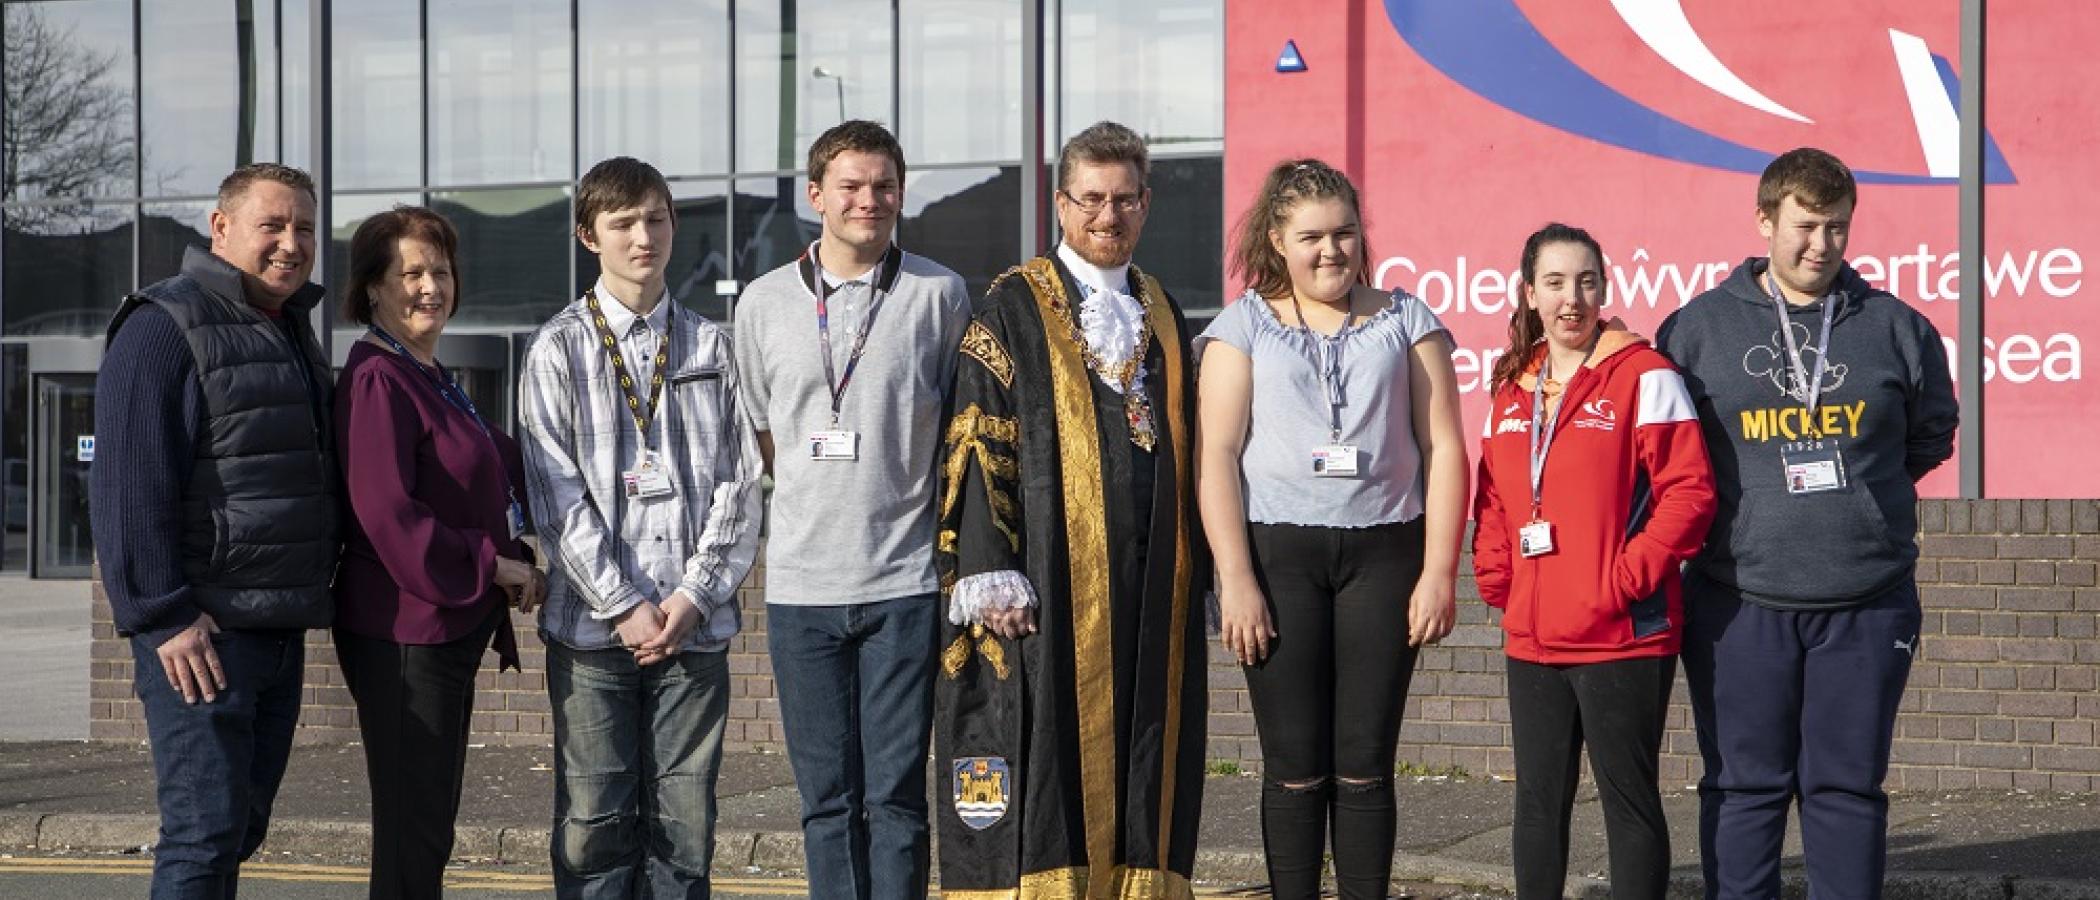 Gower College Swansea welcomes Lord Mayor 